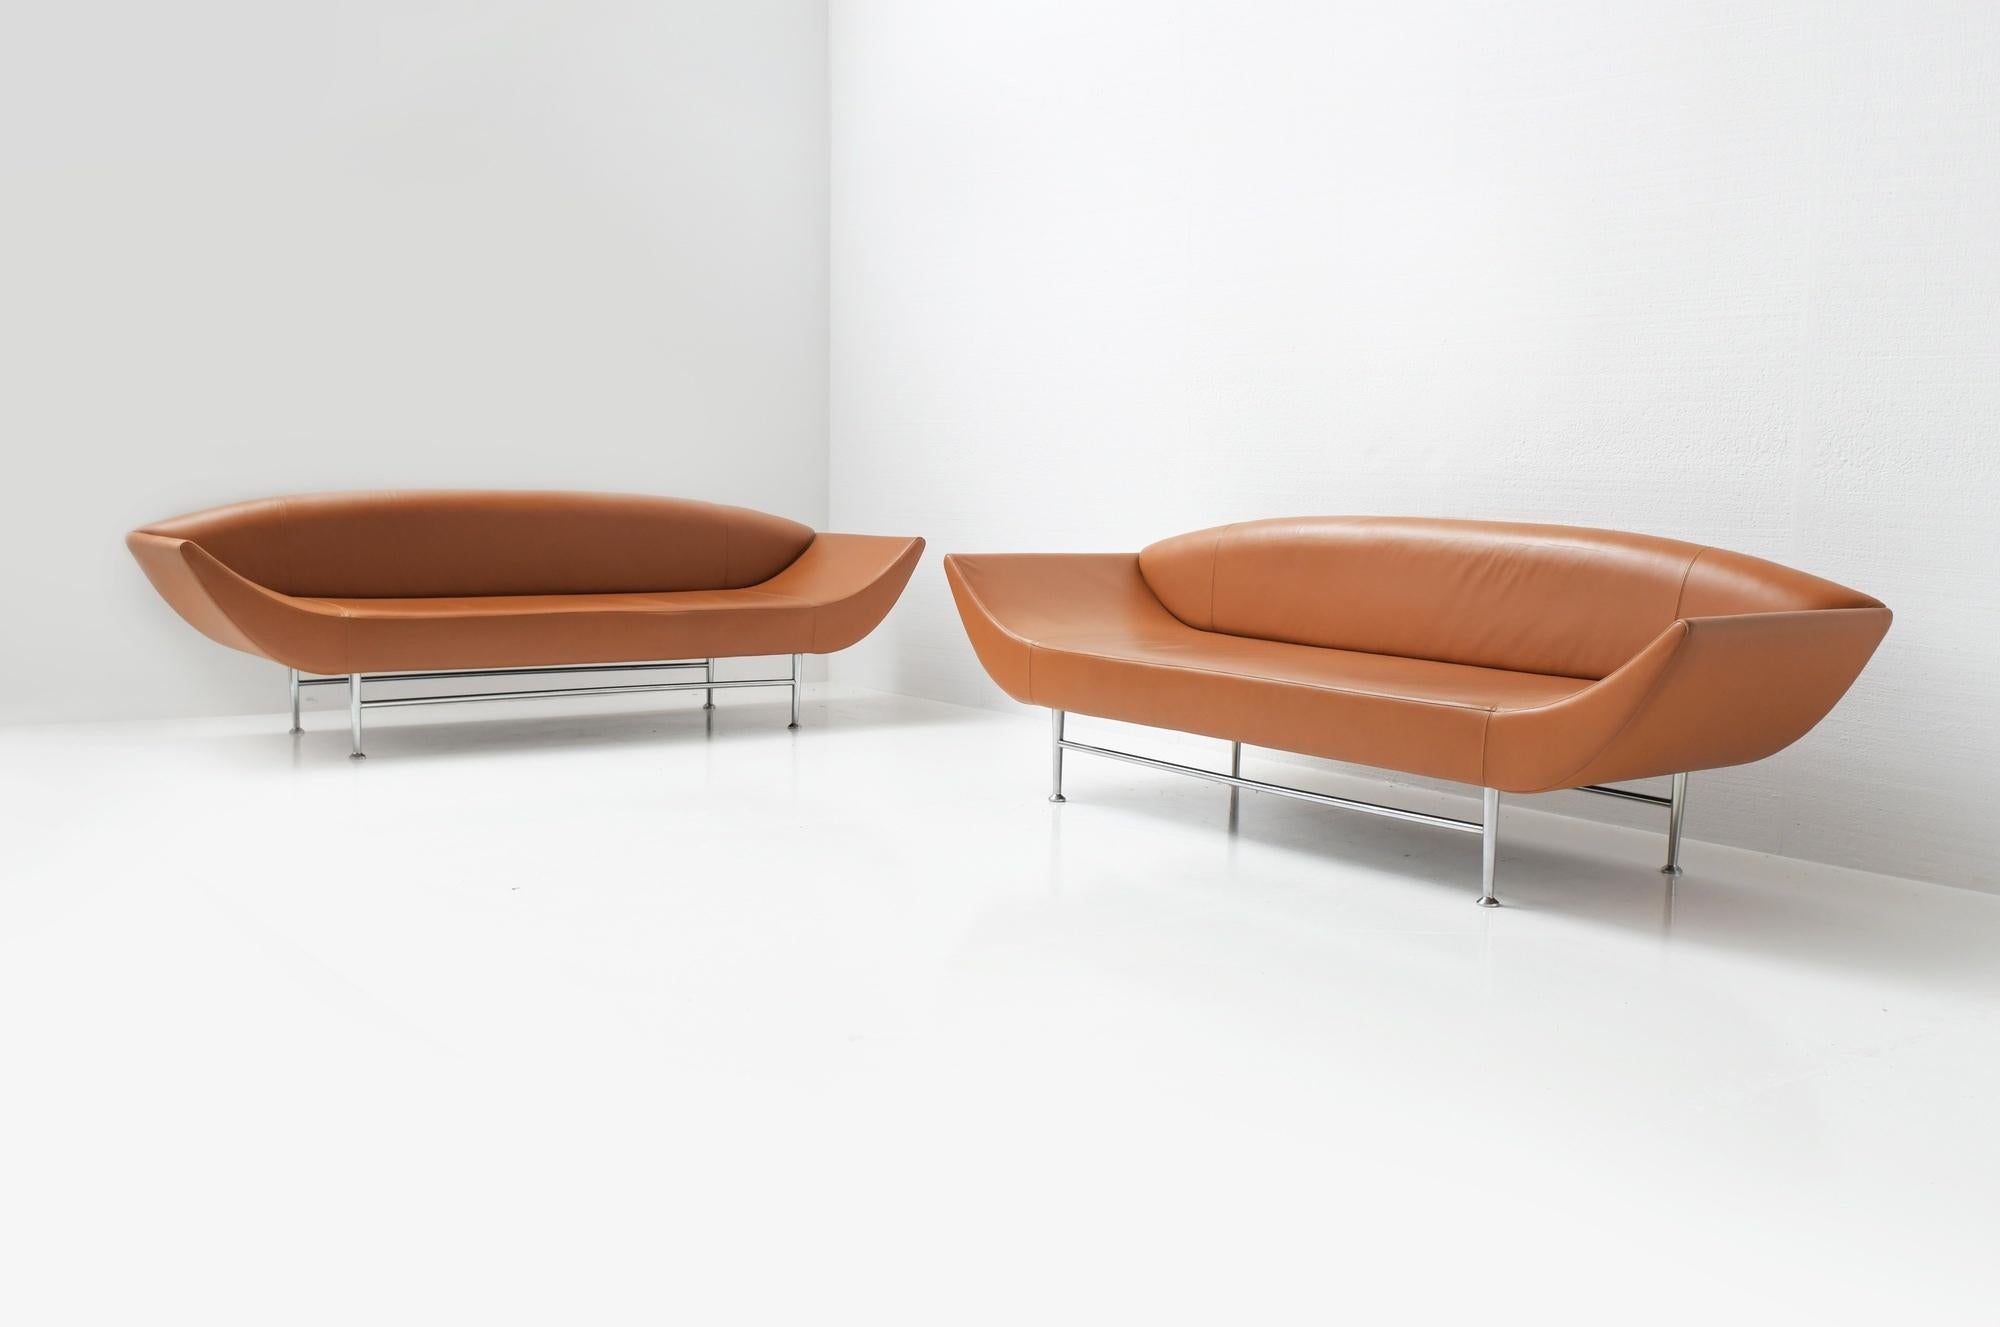 Great set of very rare vintage ‘Ellittico’ sofas.
Designed by Massimo Losa Ghini for Moroso Dinamic collection Italy (1987)
Upholstered in their typical high quality artificial cognac leather (original)

Mint condition!!.